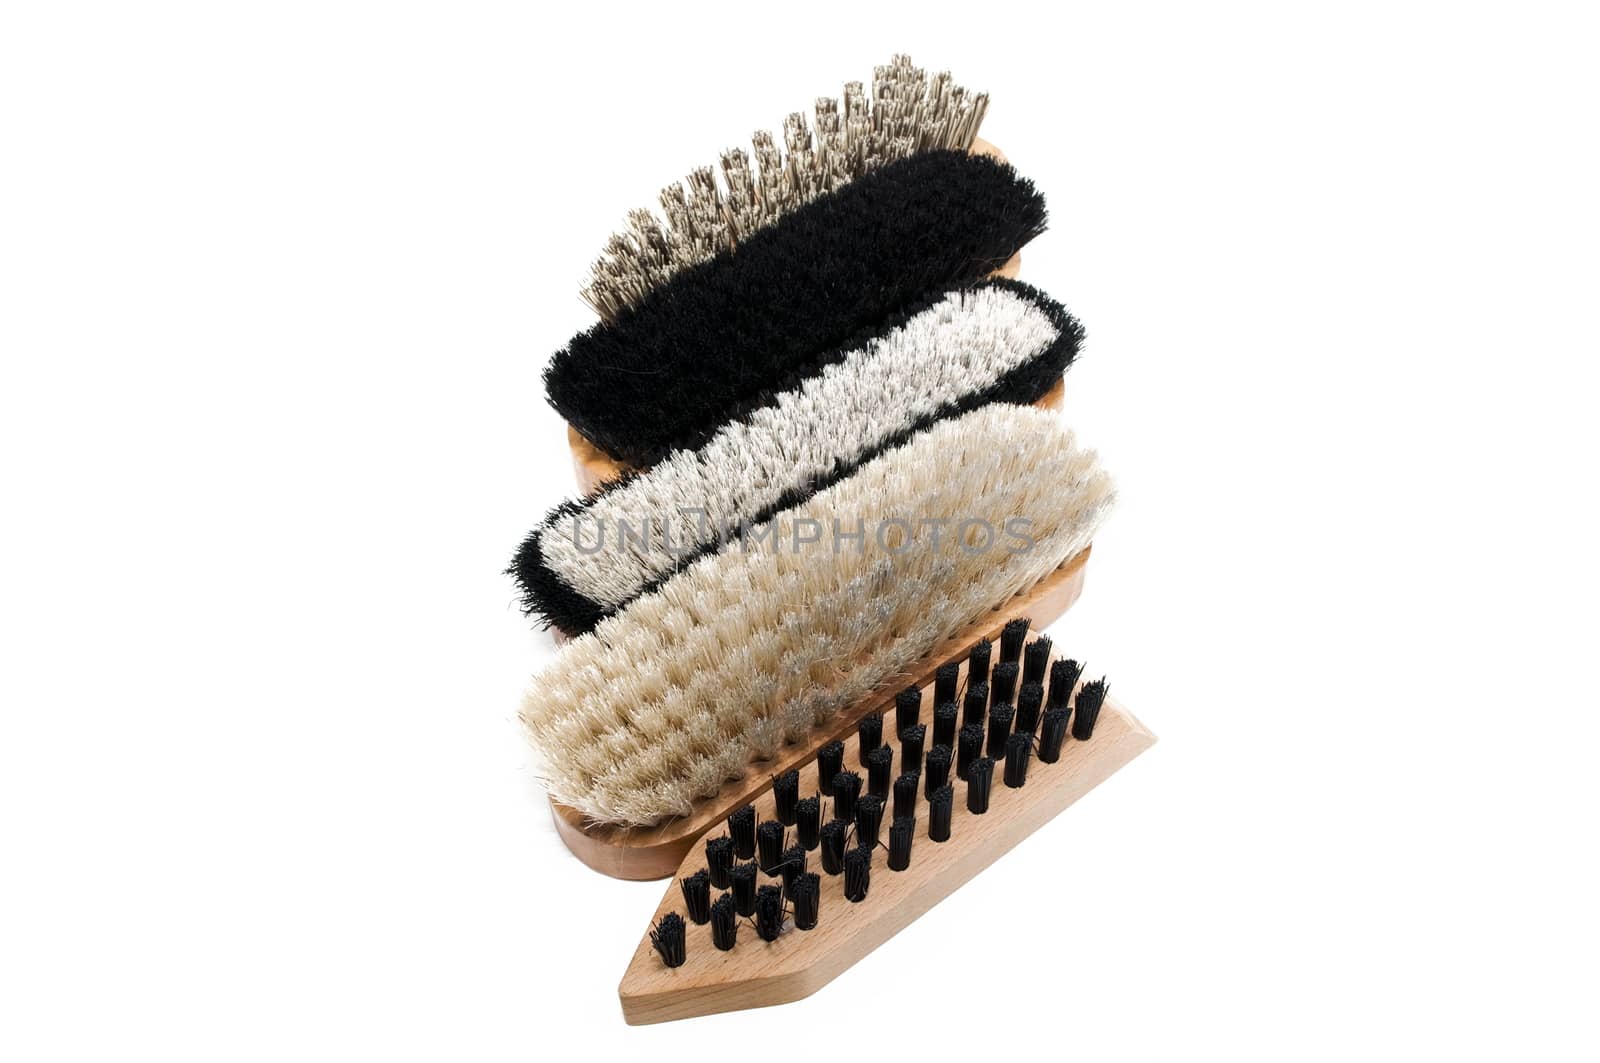 brushes for shoes by pozezan